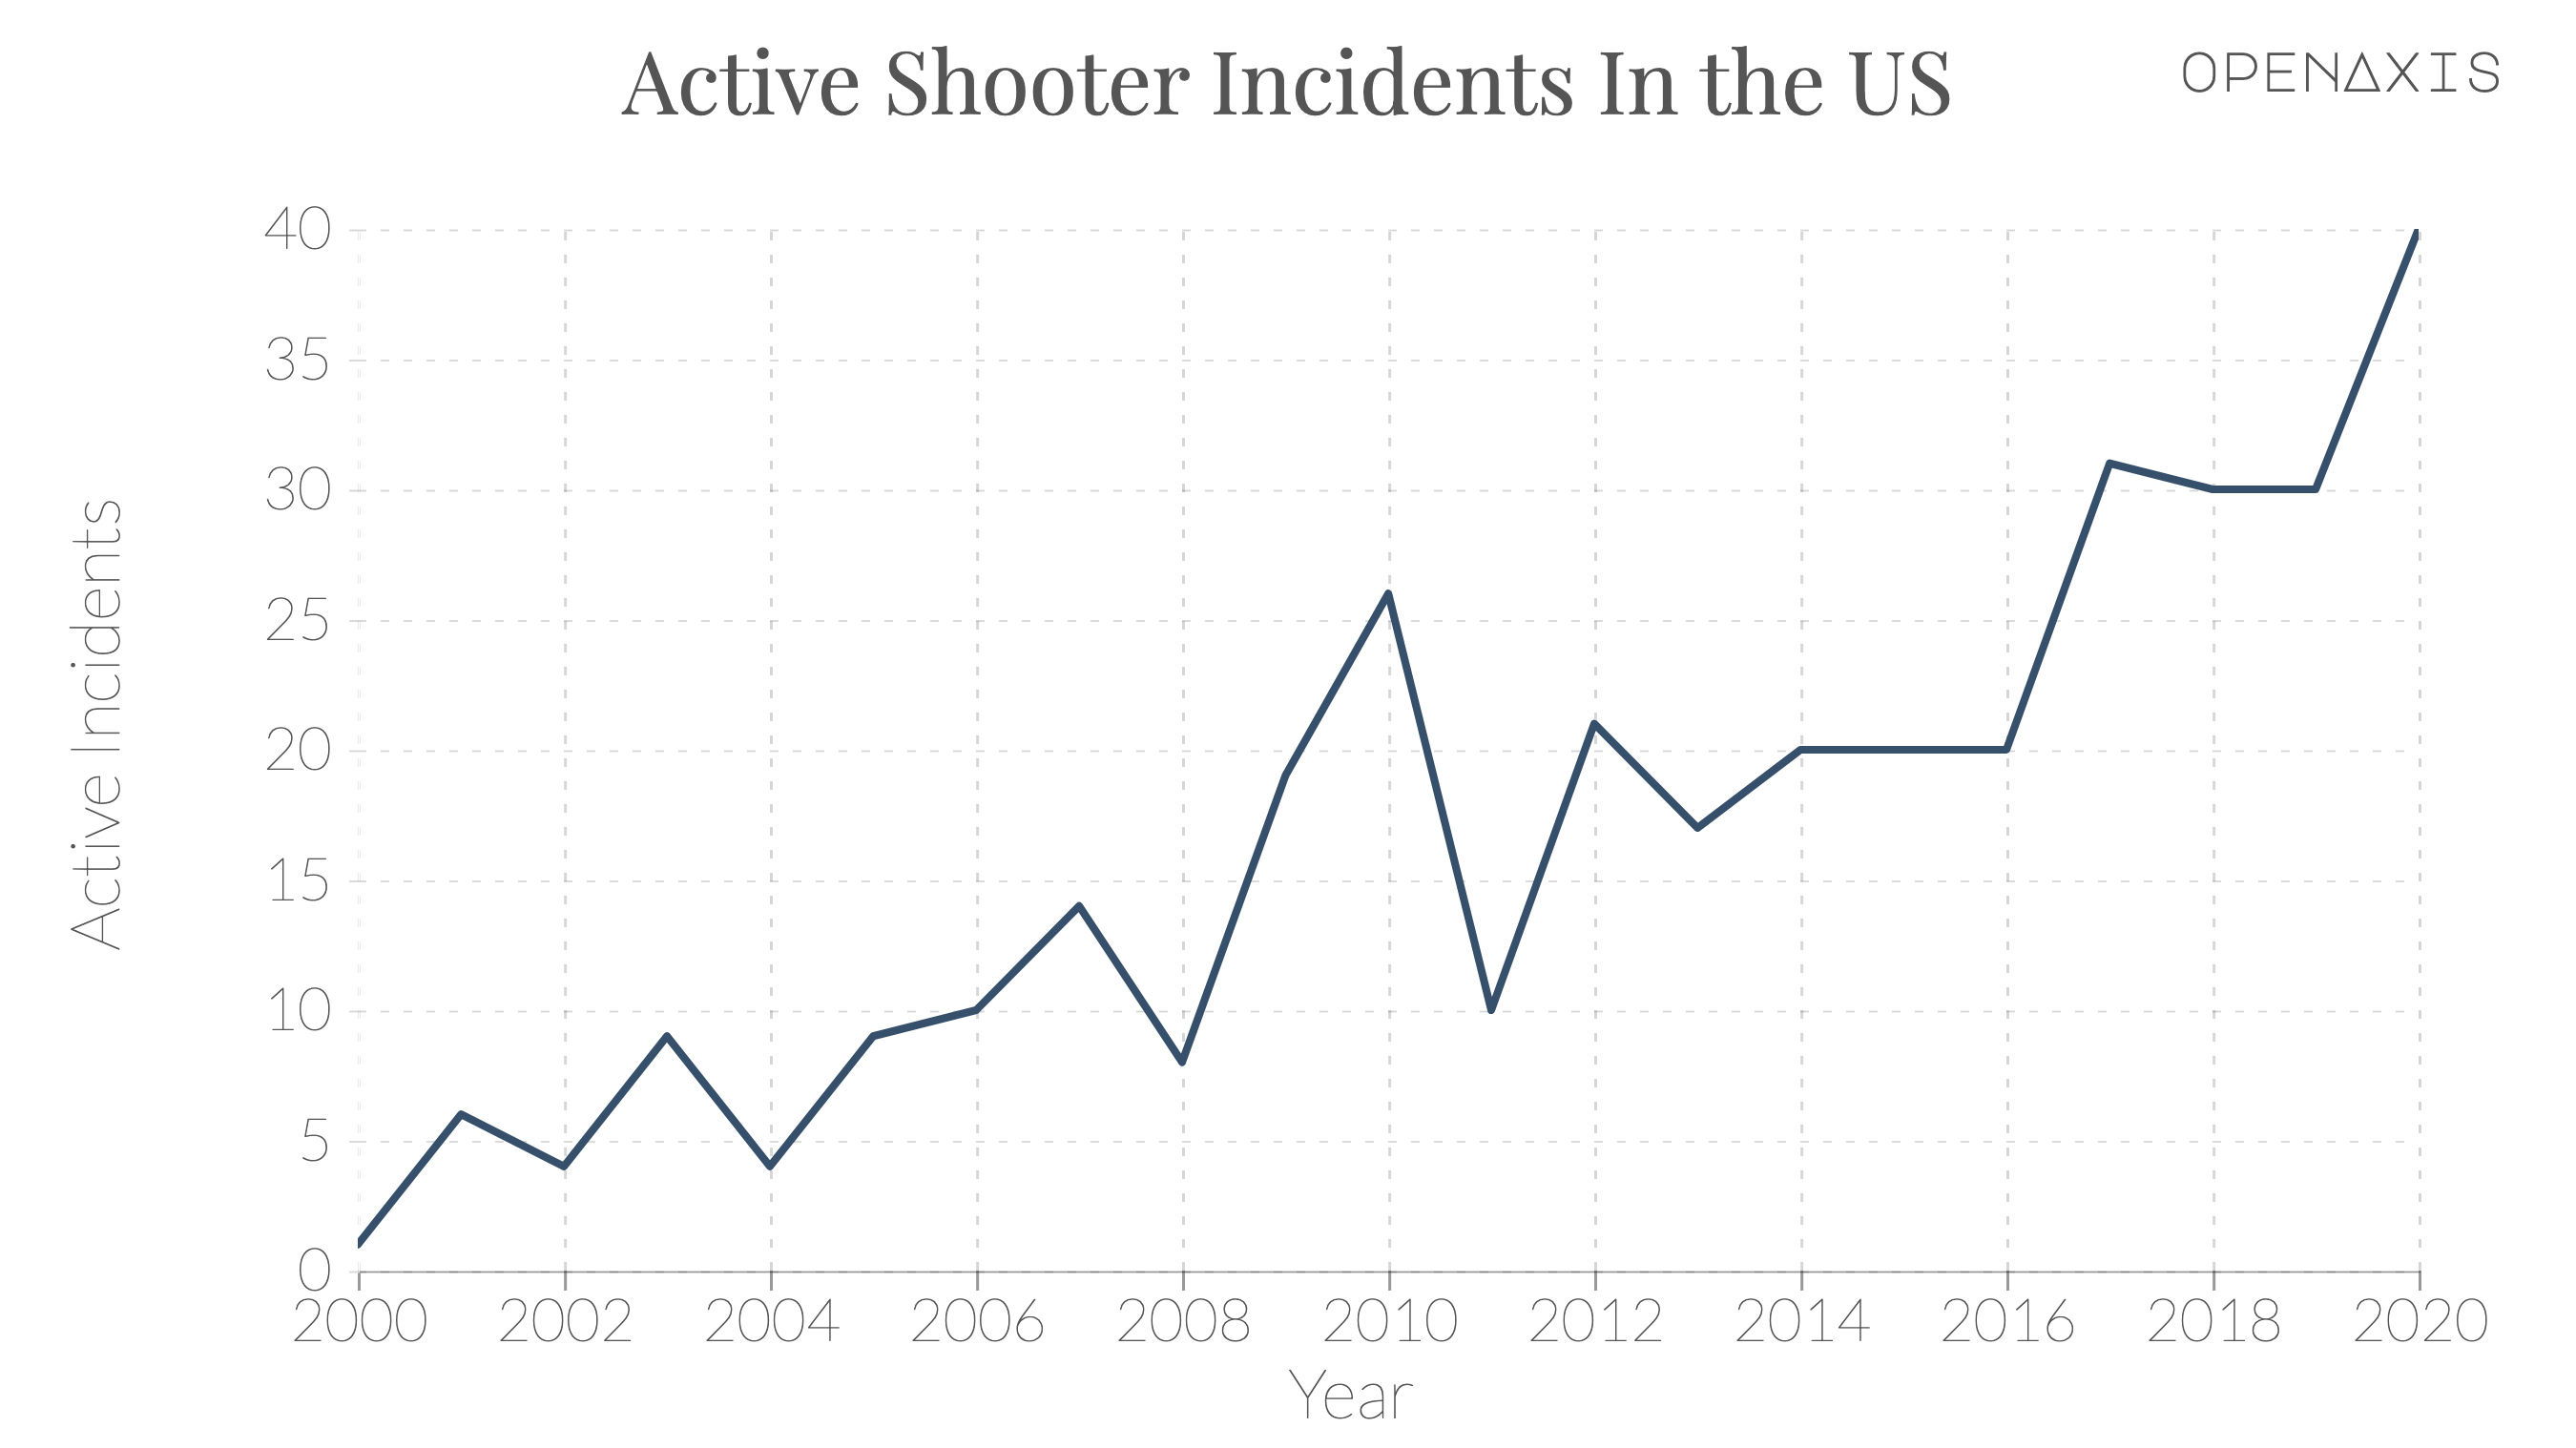 "Active Shooter Incidents In the US"